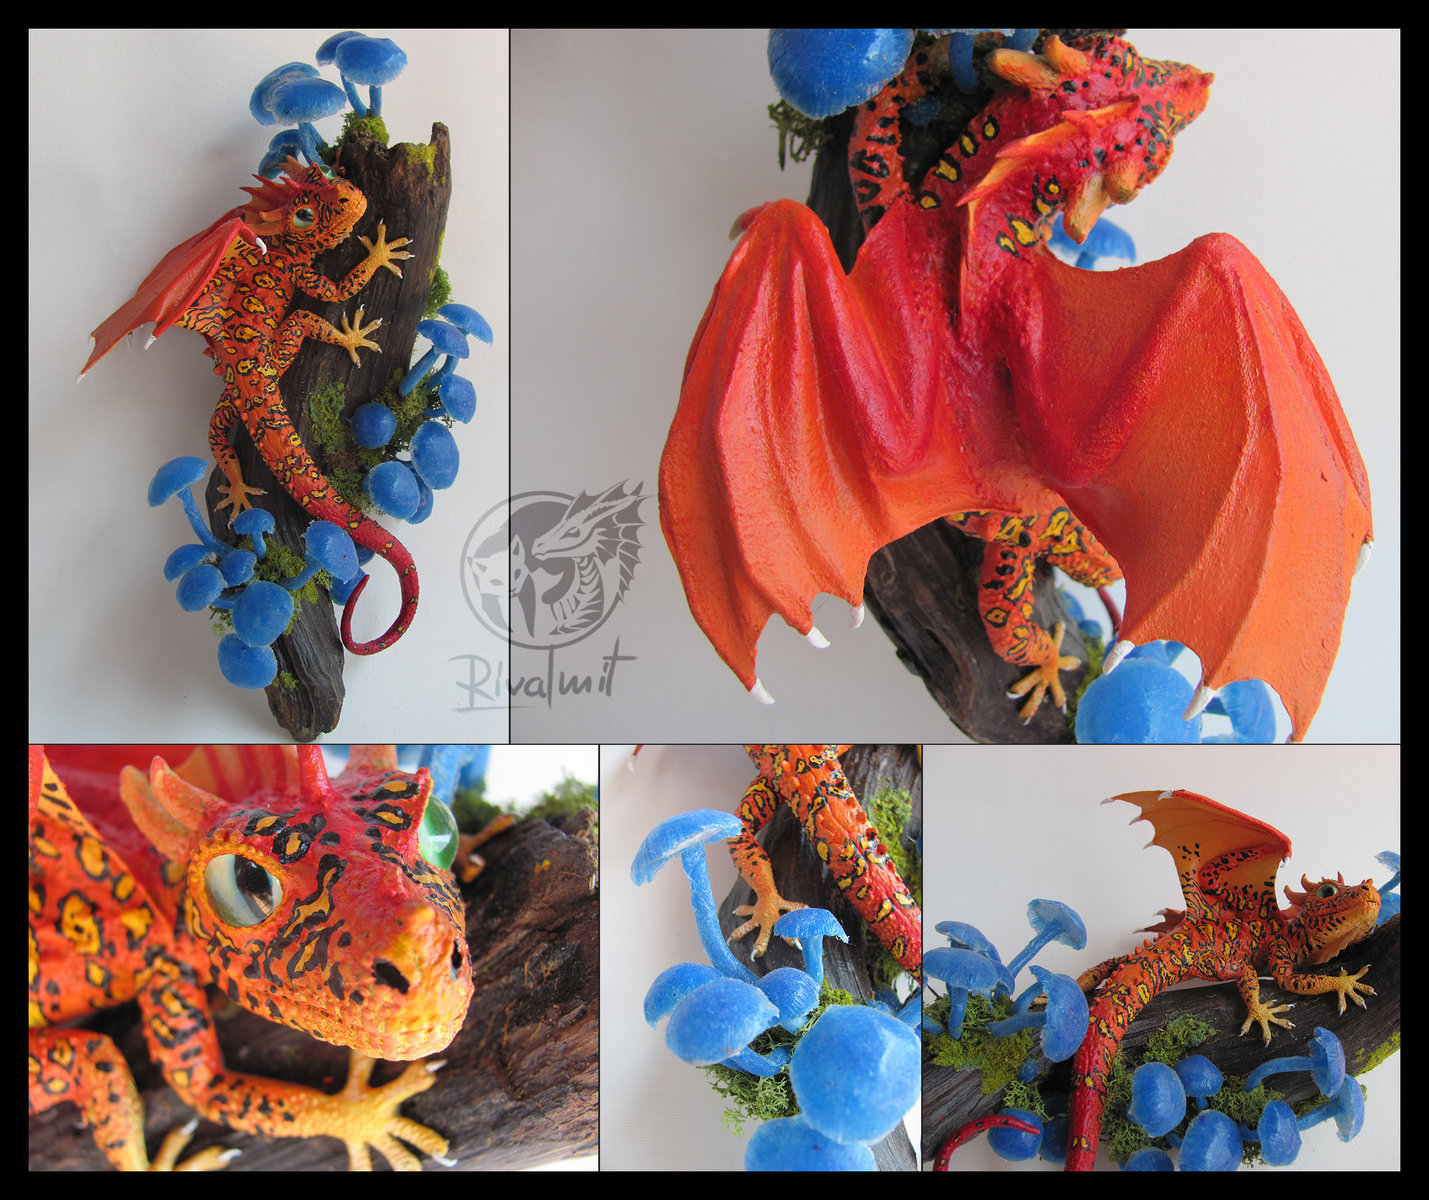 sculpture dragon geco mythology Secret from the depths of the bioluminescent Forest